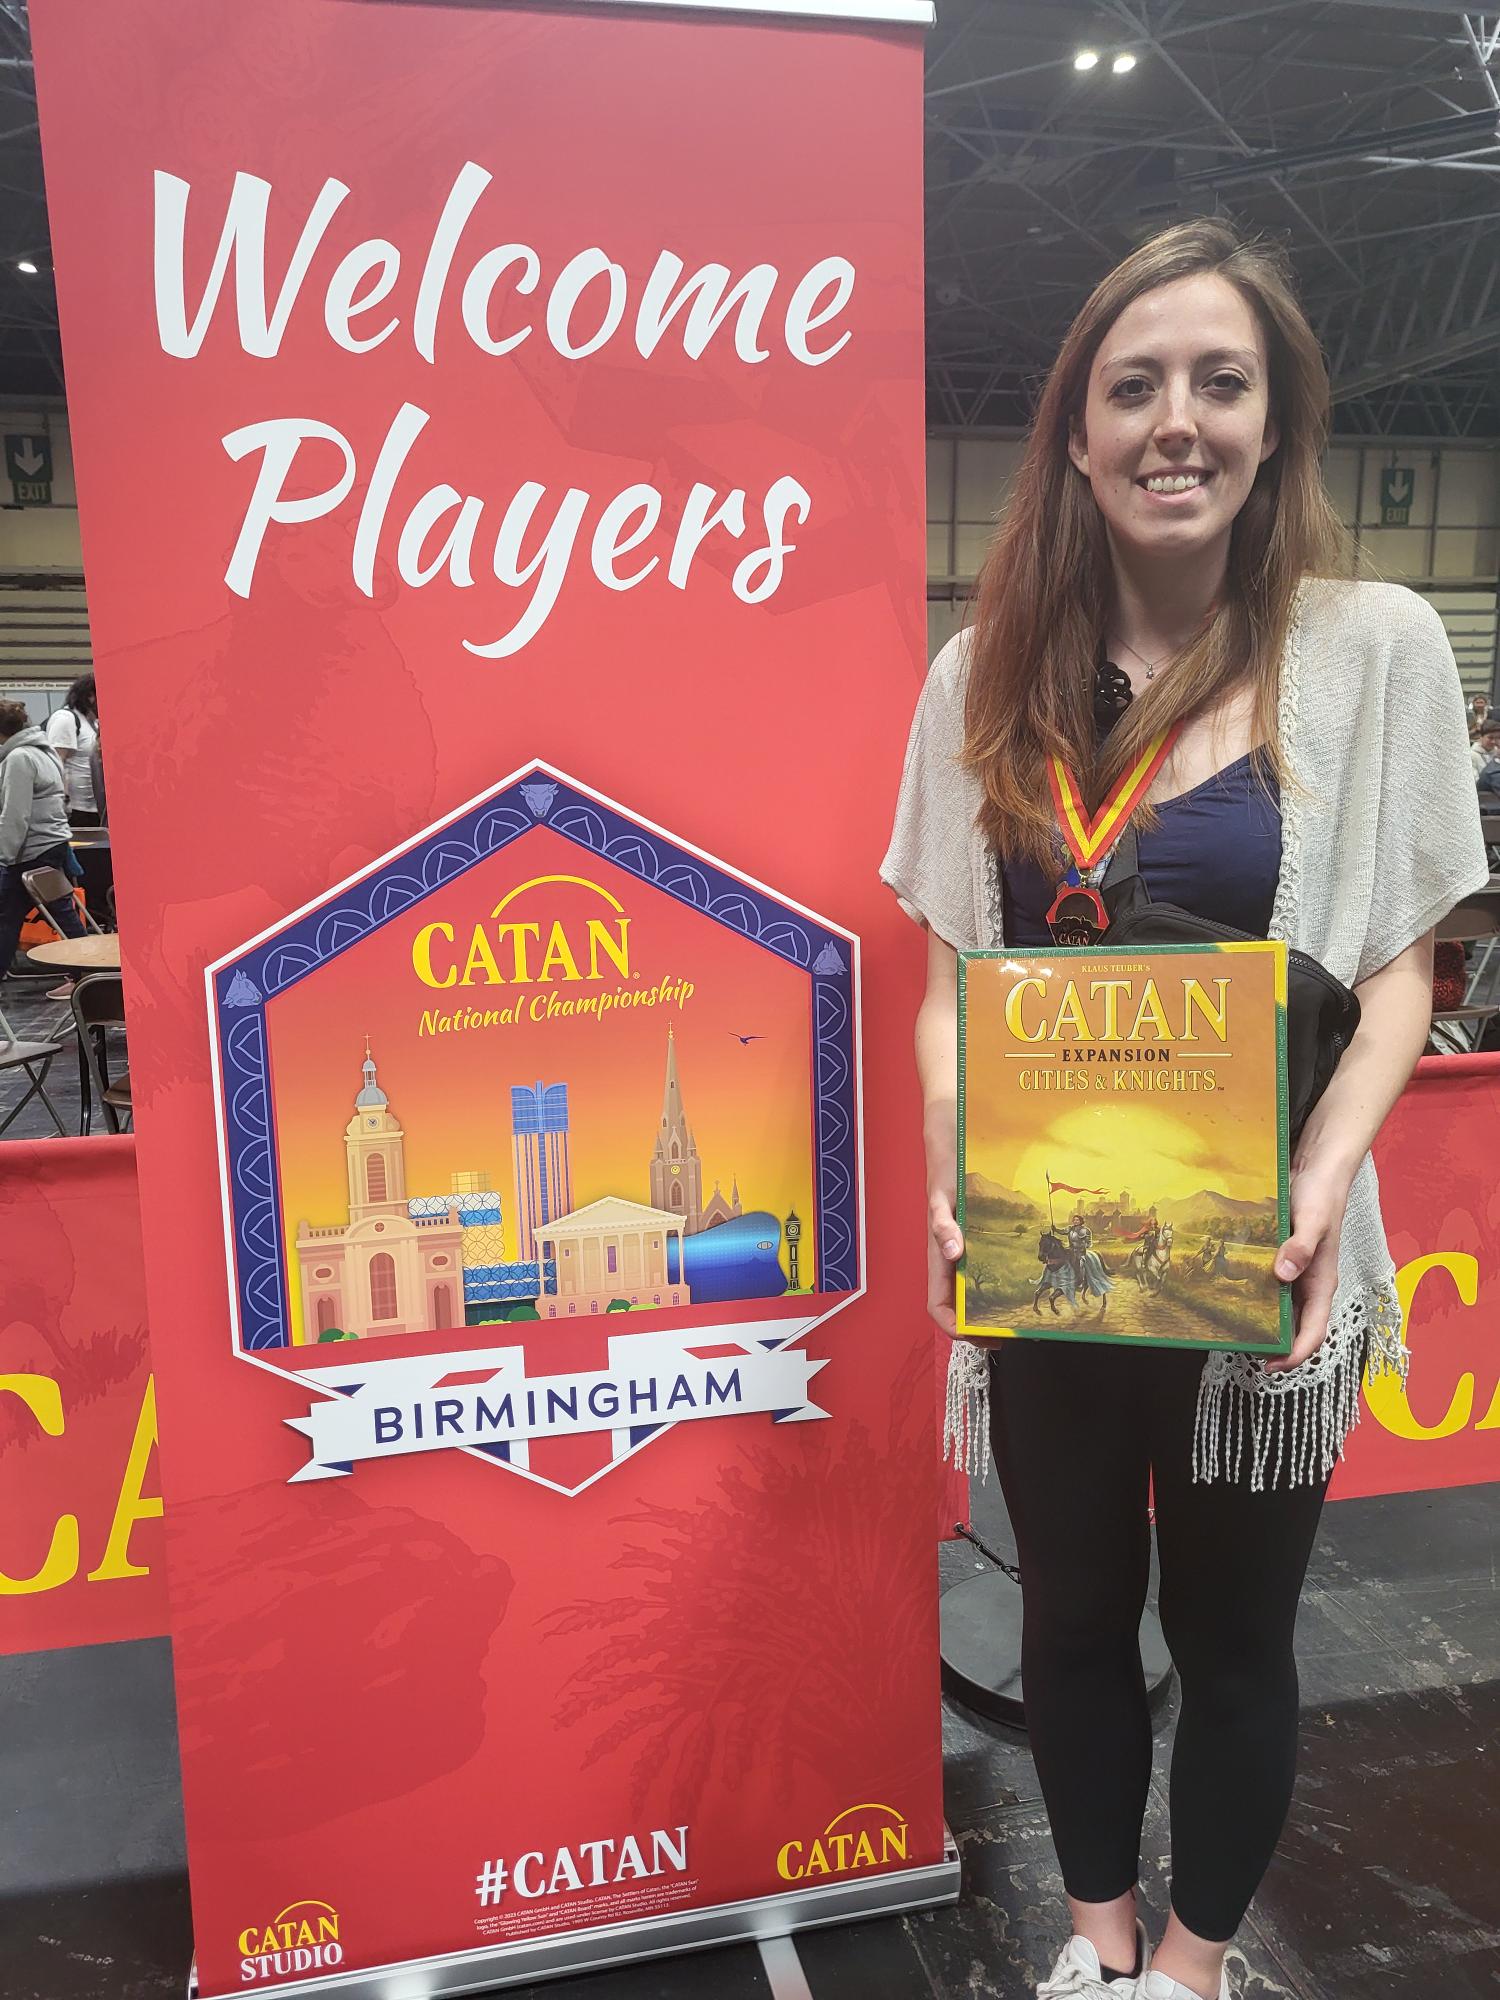 A picture of Katrina Tripple holding a CATAN – Cities & Knights box while standing on the right to a red banner that says welcome players, with text below saying CATAN Championships Birmingham. 